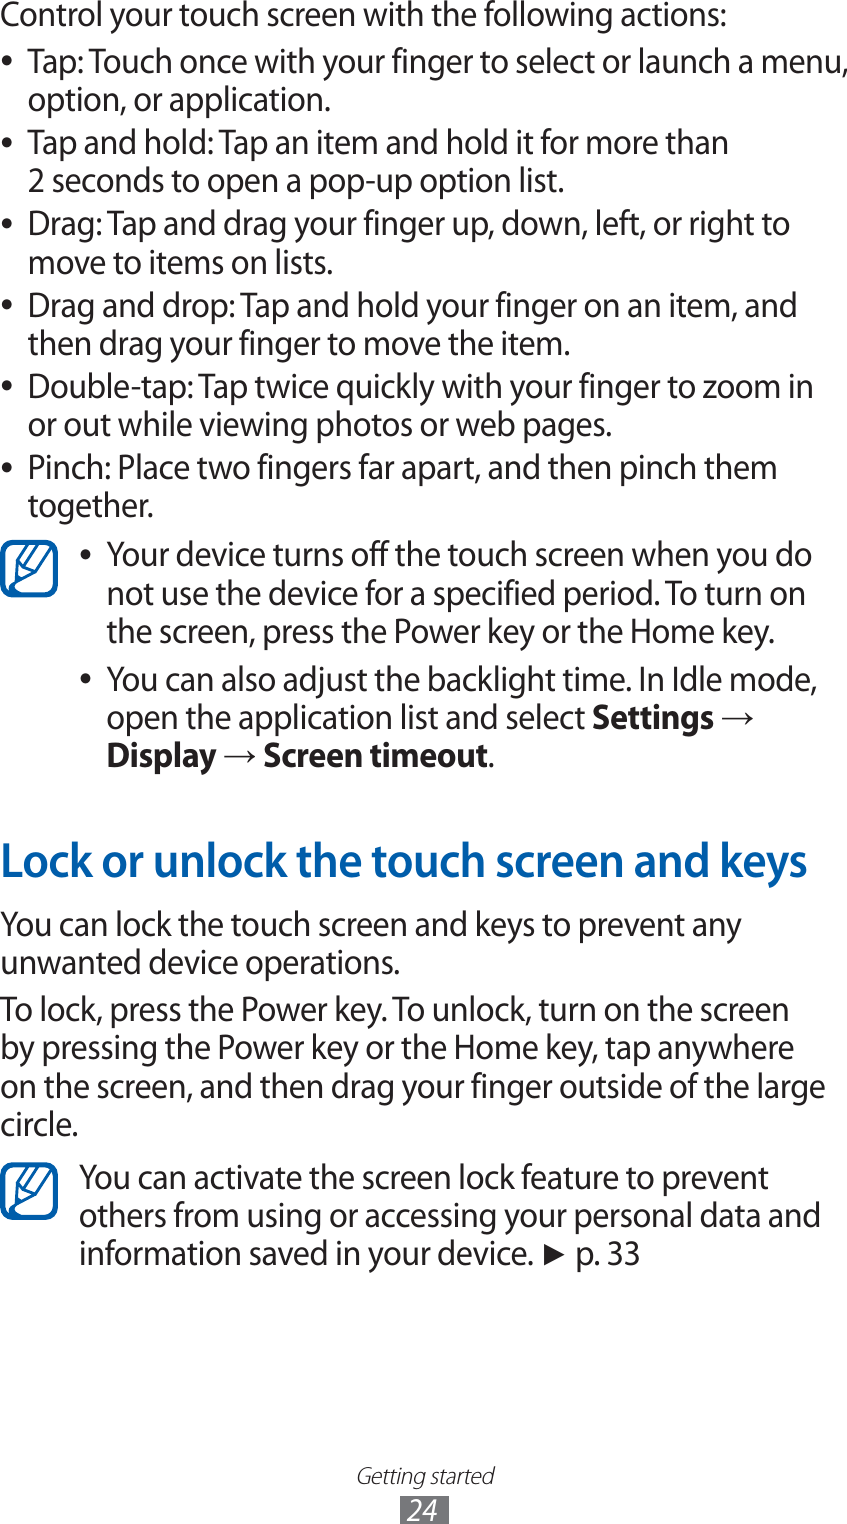 Getting started24Control your touch screen with the following actions:Tap: Touch once with your finger to select or launch a menu,  ●option, or application.Tap and hold: Tap an item and hold it for more than  ●2 seconds to open a pop-up option list.Drag: Tap and drag your finger up, down, left, or right to  ●move to items on lists.Drag and drop: Tap and hold your finger on an item, and  ●then drag your finger to move the item.Double-tap: Tap twice quickly with your finger to zoom in  ●or out while viewing photos or web pages.Pinch: Place two fingers far apart, and then pinch them  ●together.Your device turns off the touch screen when you do  ●not use the device for a specified period. To turn on the screen, press the Power key or the Home key.You can also adjust the backlight time. In Idle mode,  ●open the application list and select Settings → Display → Screen timeout.Lock or unlock the touch screen and keysYou can lock the touch screen and keys to prevent any unwanted device operations.To lock, press the Power key. To unlock, turn on the screen by pressing the Power key or the Home key, tap anywhere on the screen, and then drag your finger outside of the large circle.You can activate the screen lock feature to prevent others from using or accessing your personal data and information saved in your device. ► p. 33